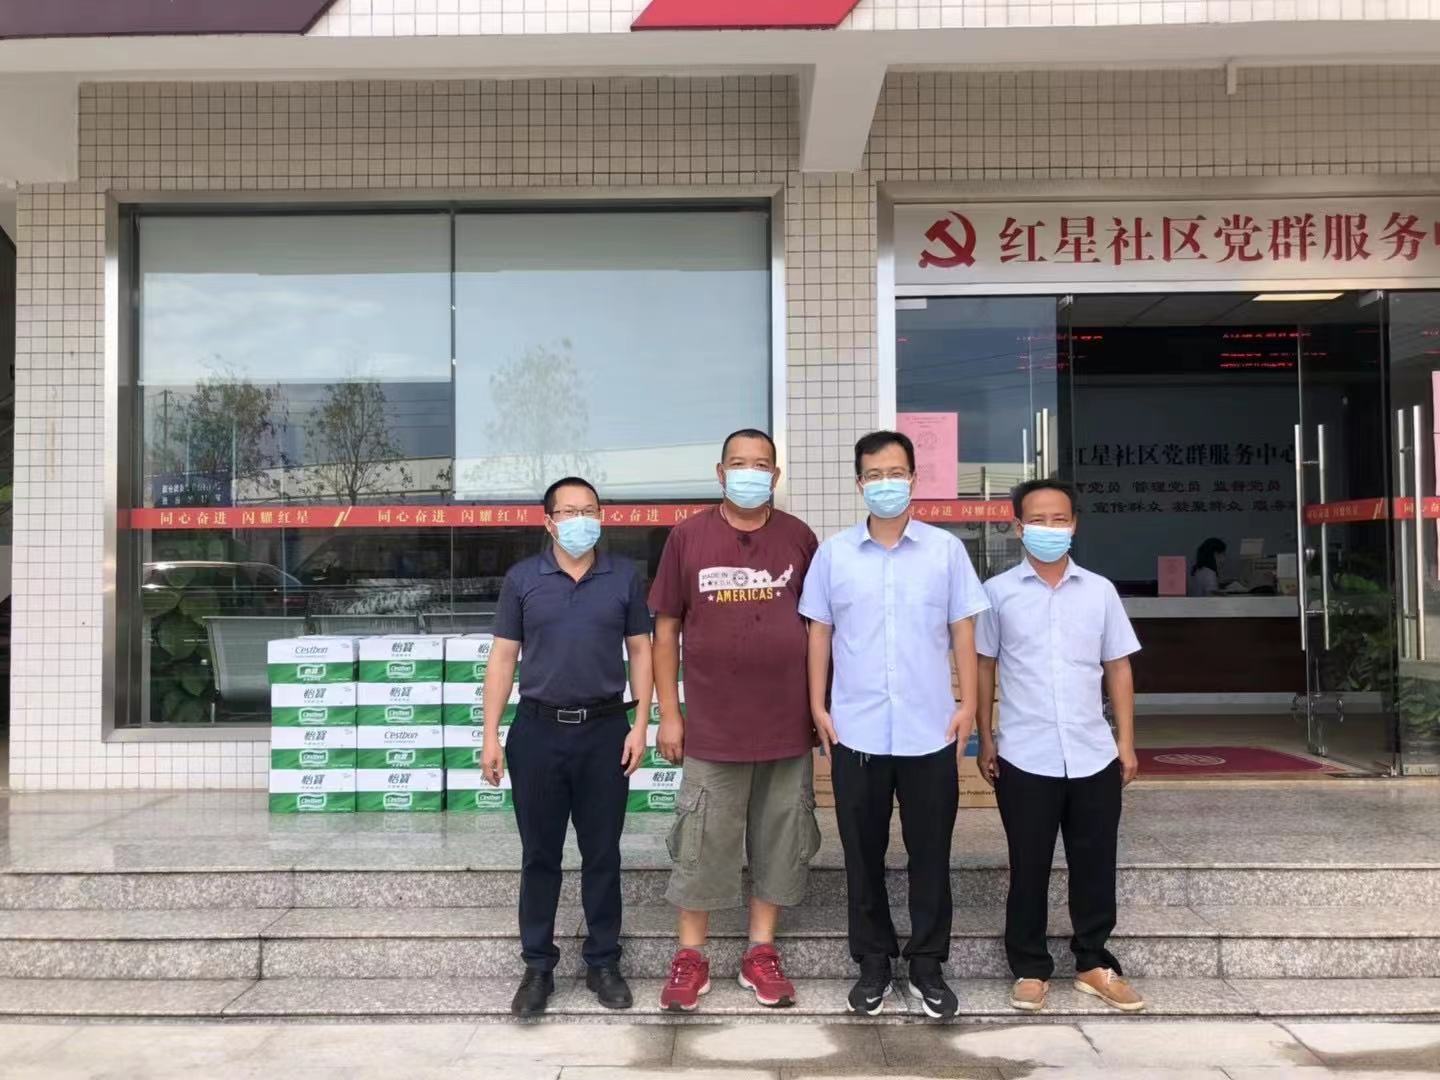 Rayson company fight the epidemic together with all the people in Nanhai